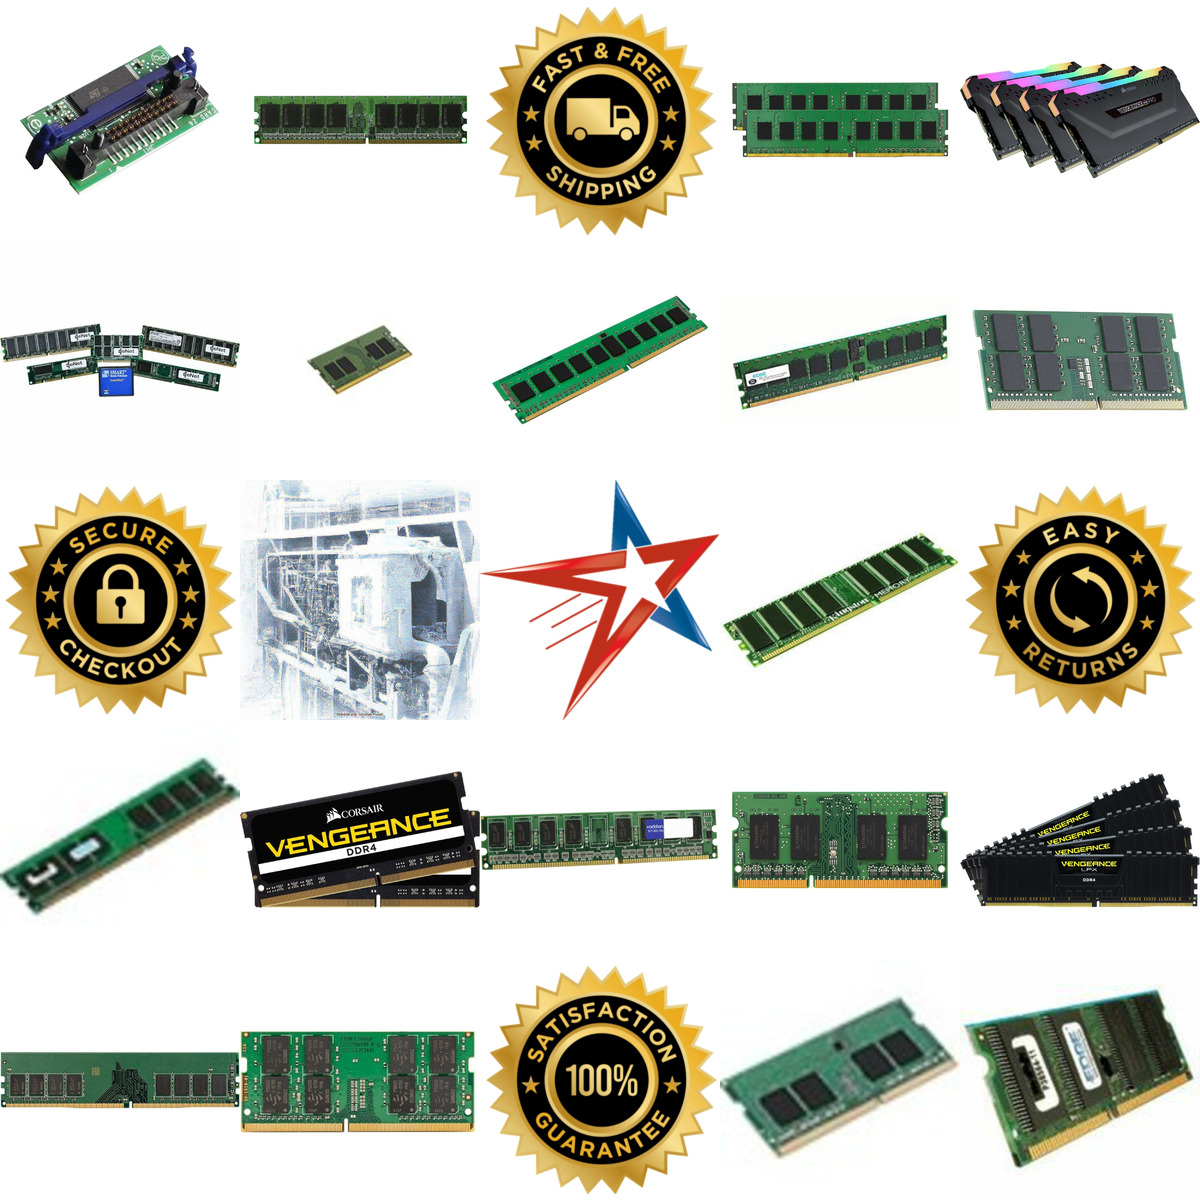 A selection of Memory products on GoVets